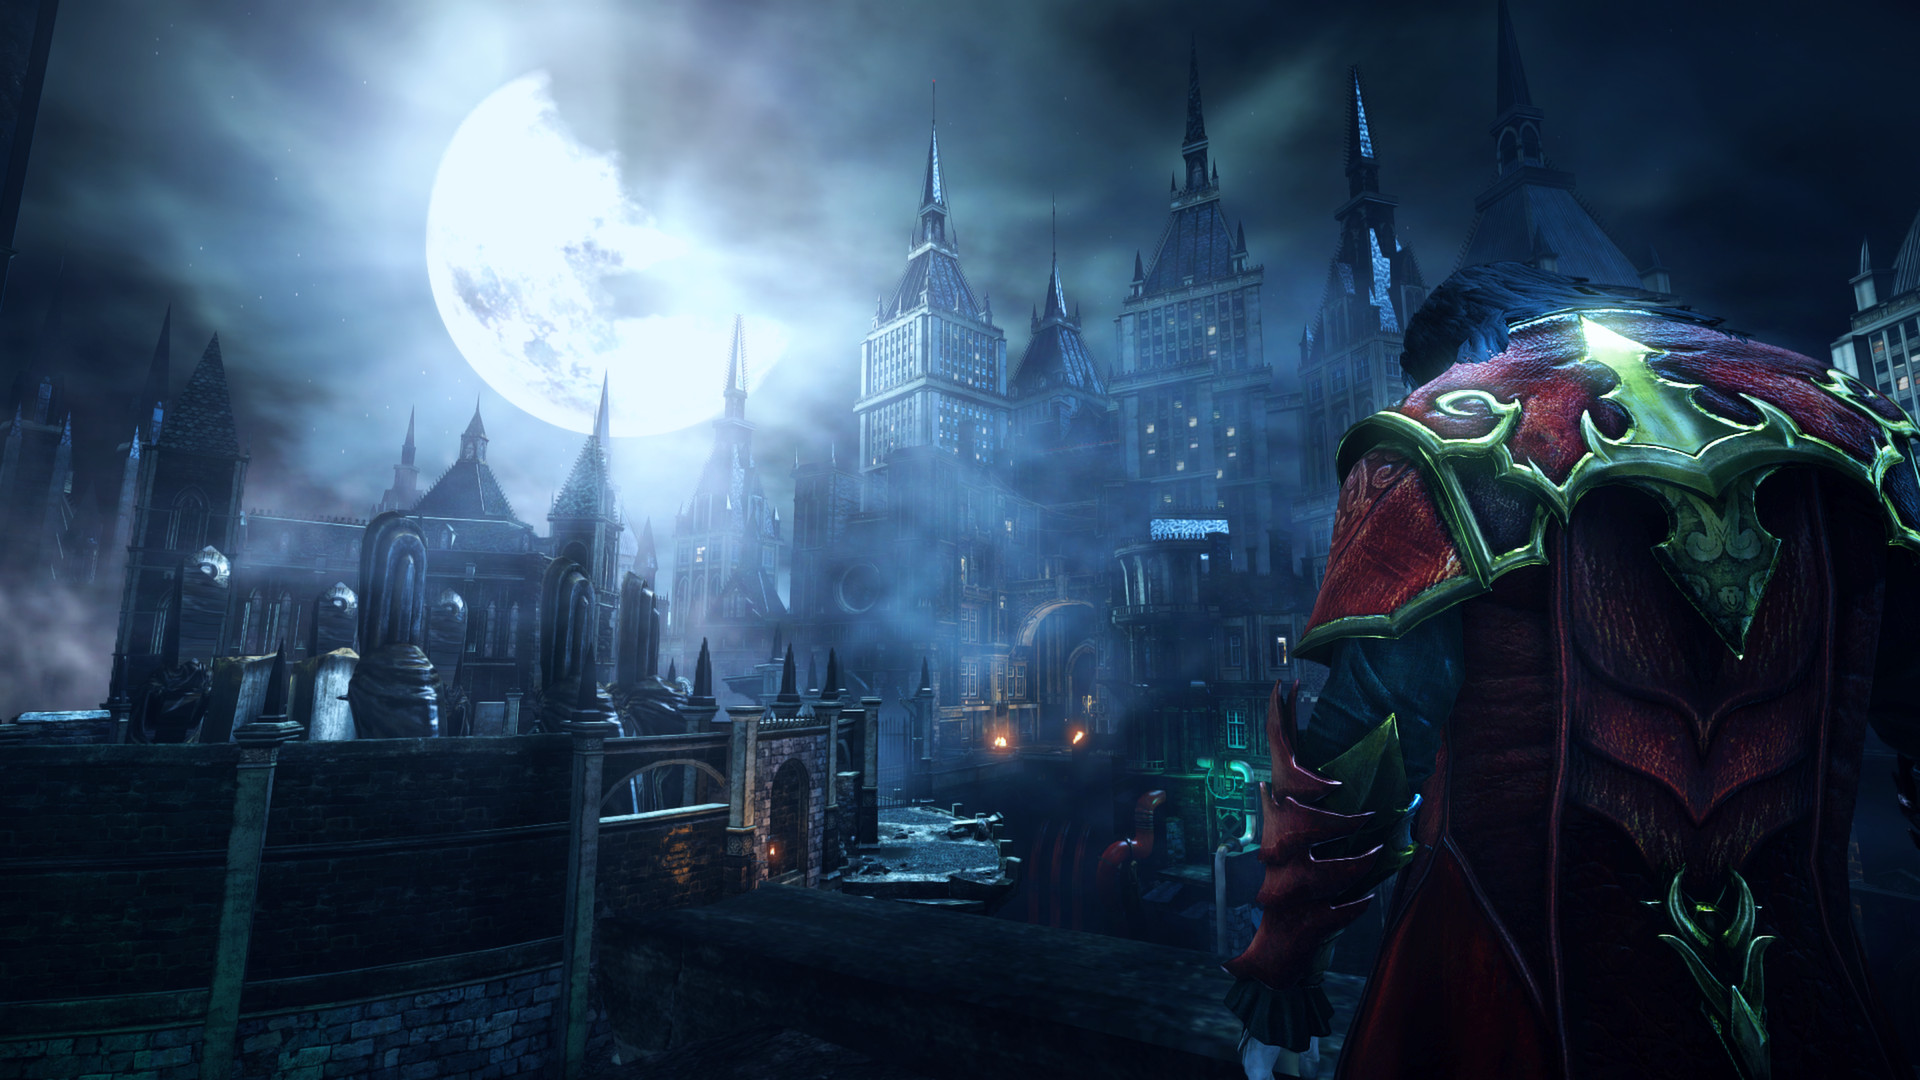 Castlevania – Lords of Shadow 2